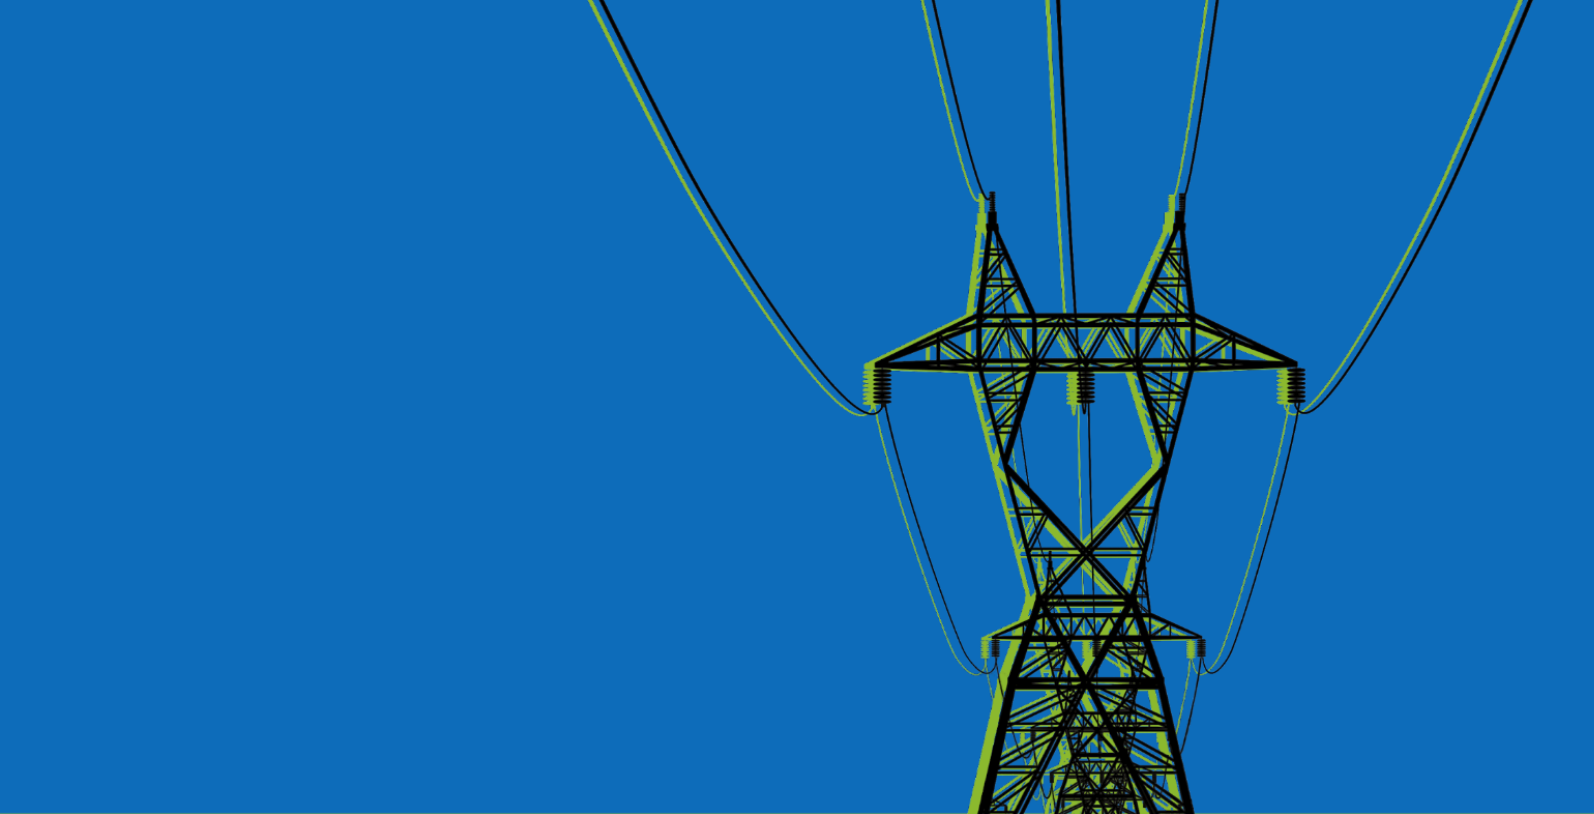 A transmission tower holds electric power lines.